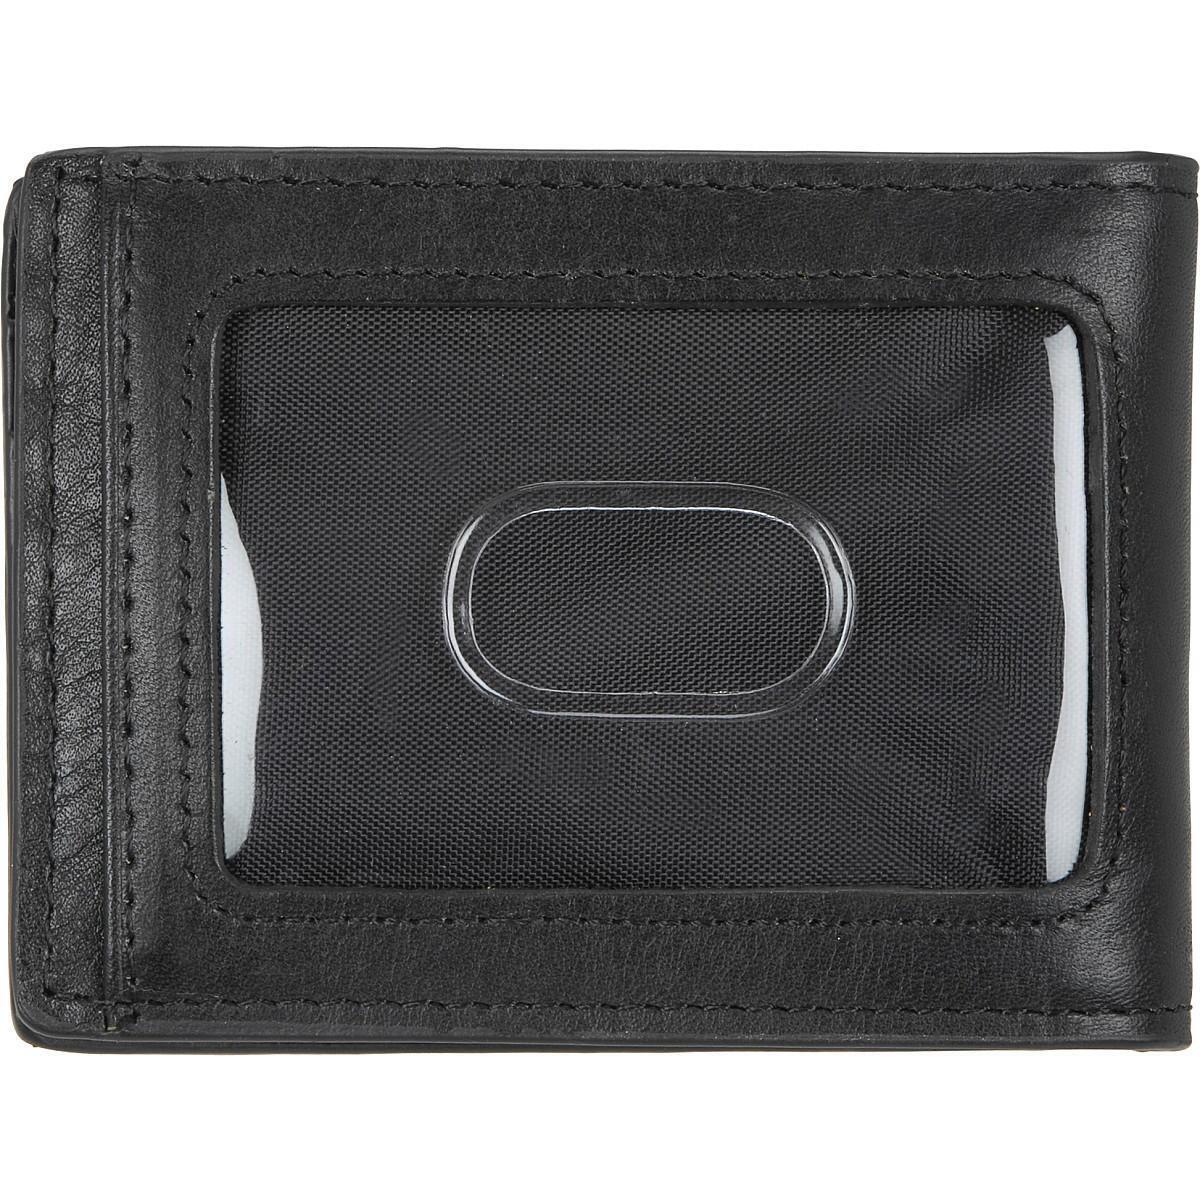 Wilsons Leather Front Pocket Leather Wallet With Bottle Opener in Black for Men - Lyst